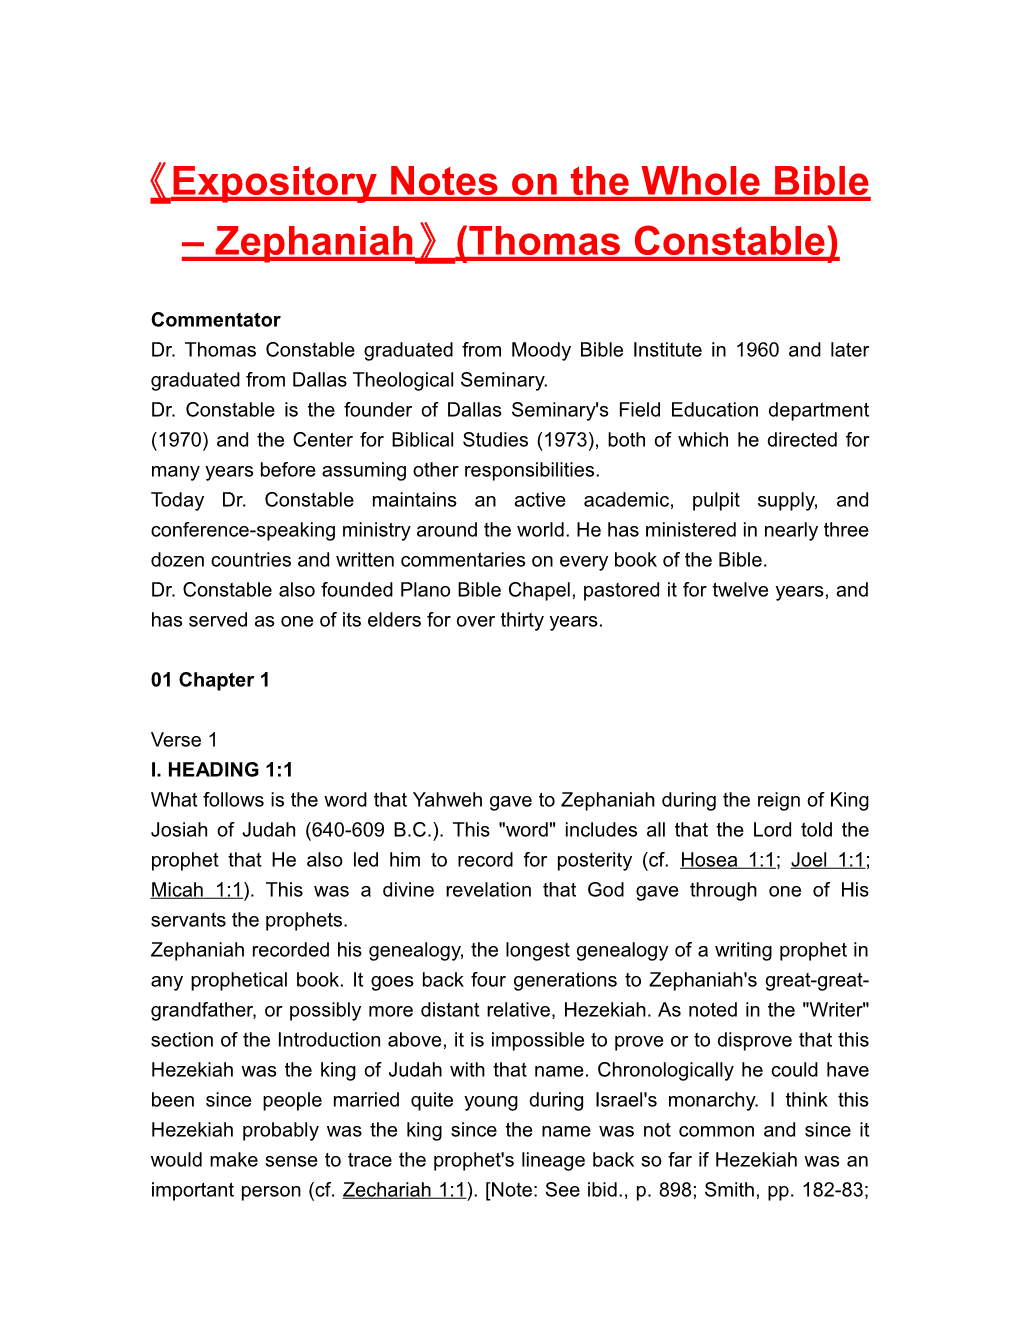 Expositorynotes on the Wholebible Zephaniah (Thomas Constable)